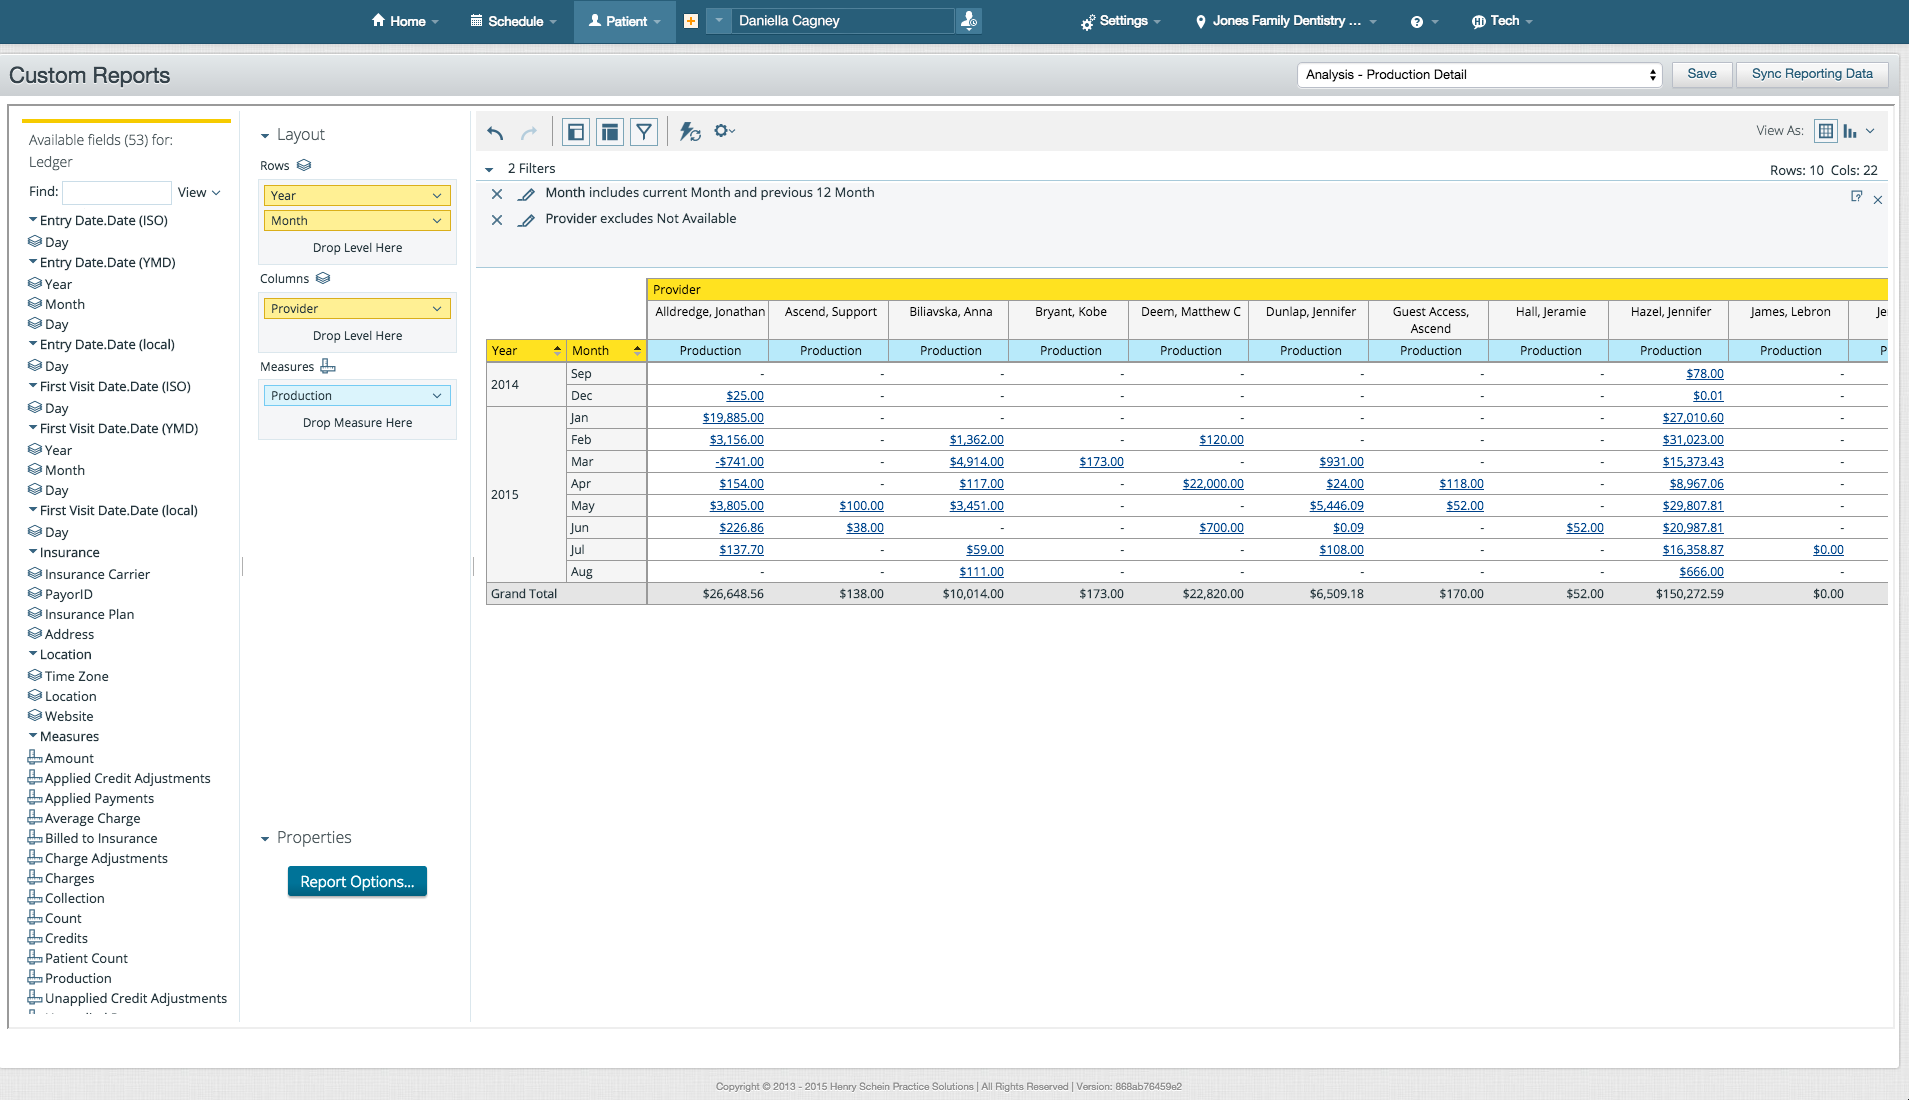 Dentrix Ascend Software - Dentrix Ascend offers users a drag-and-drop interface for custom report creation